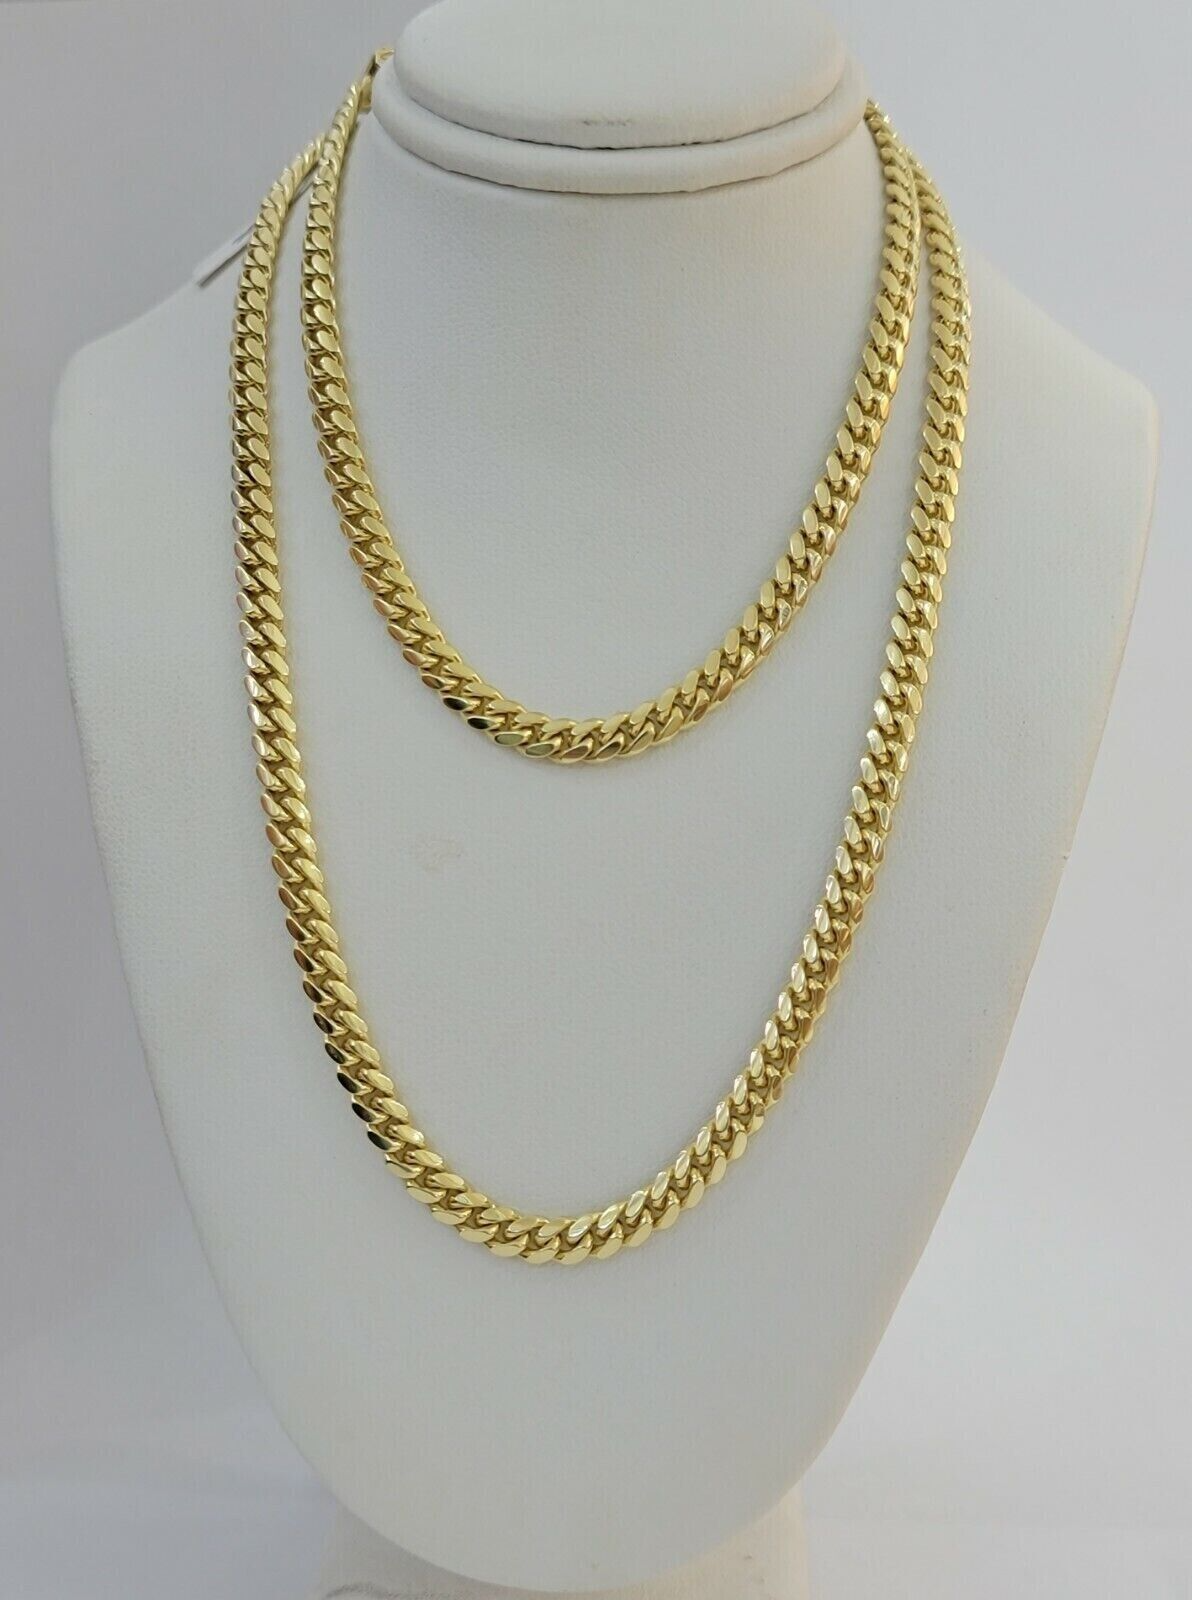 Solid 14k Yellow Gold chain 22 Inch Miami Cuban Necklace 4mm STRONG Links REAL